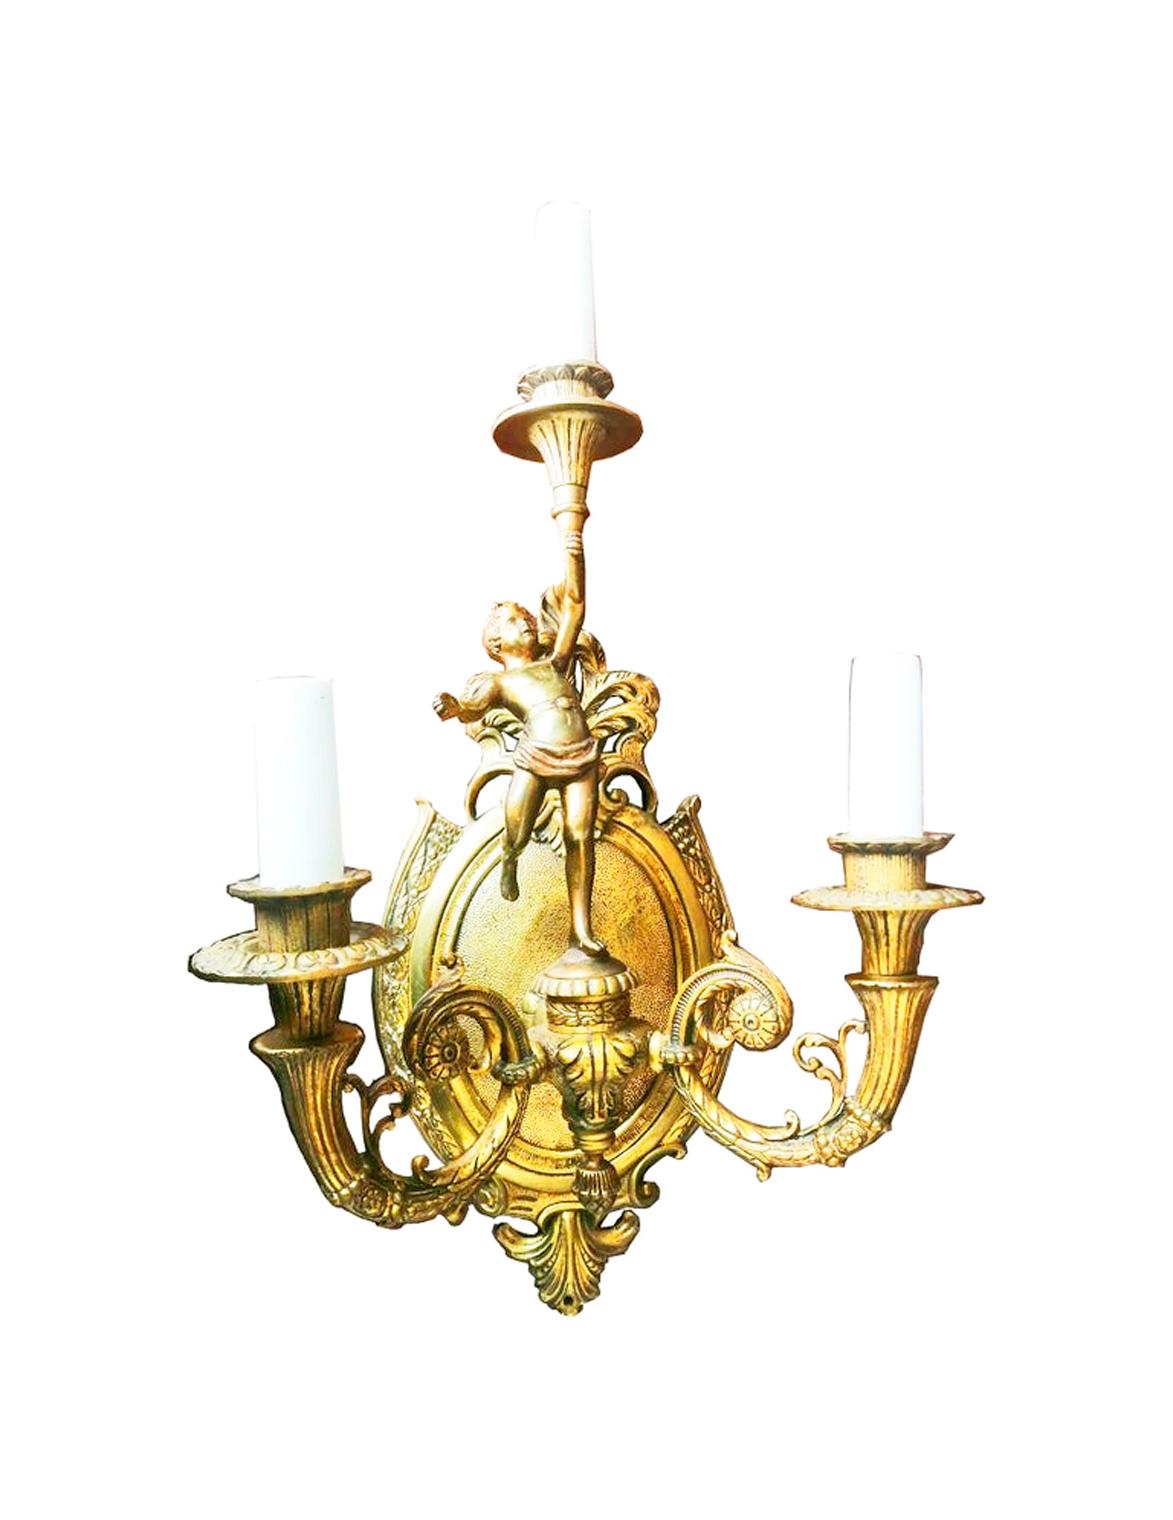 Louis XVI  Wall Sconces French Empire Style Whit Cherub Putti Carrying Torch, Bronze, Pair For Sale